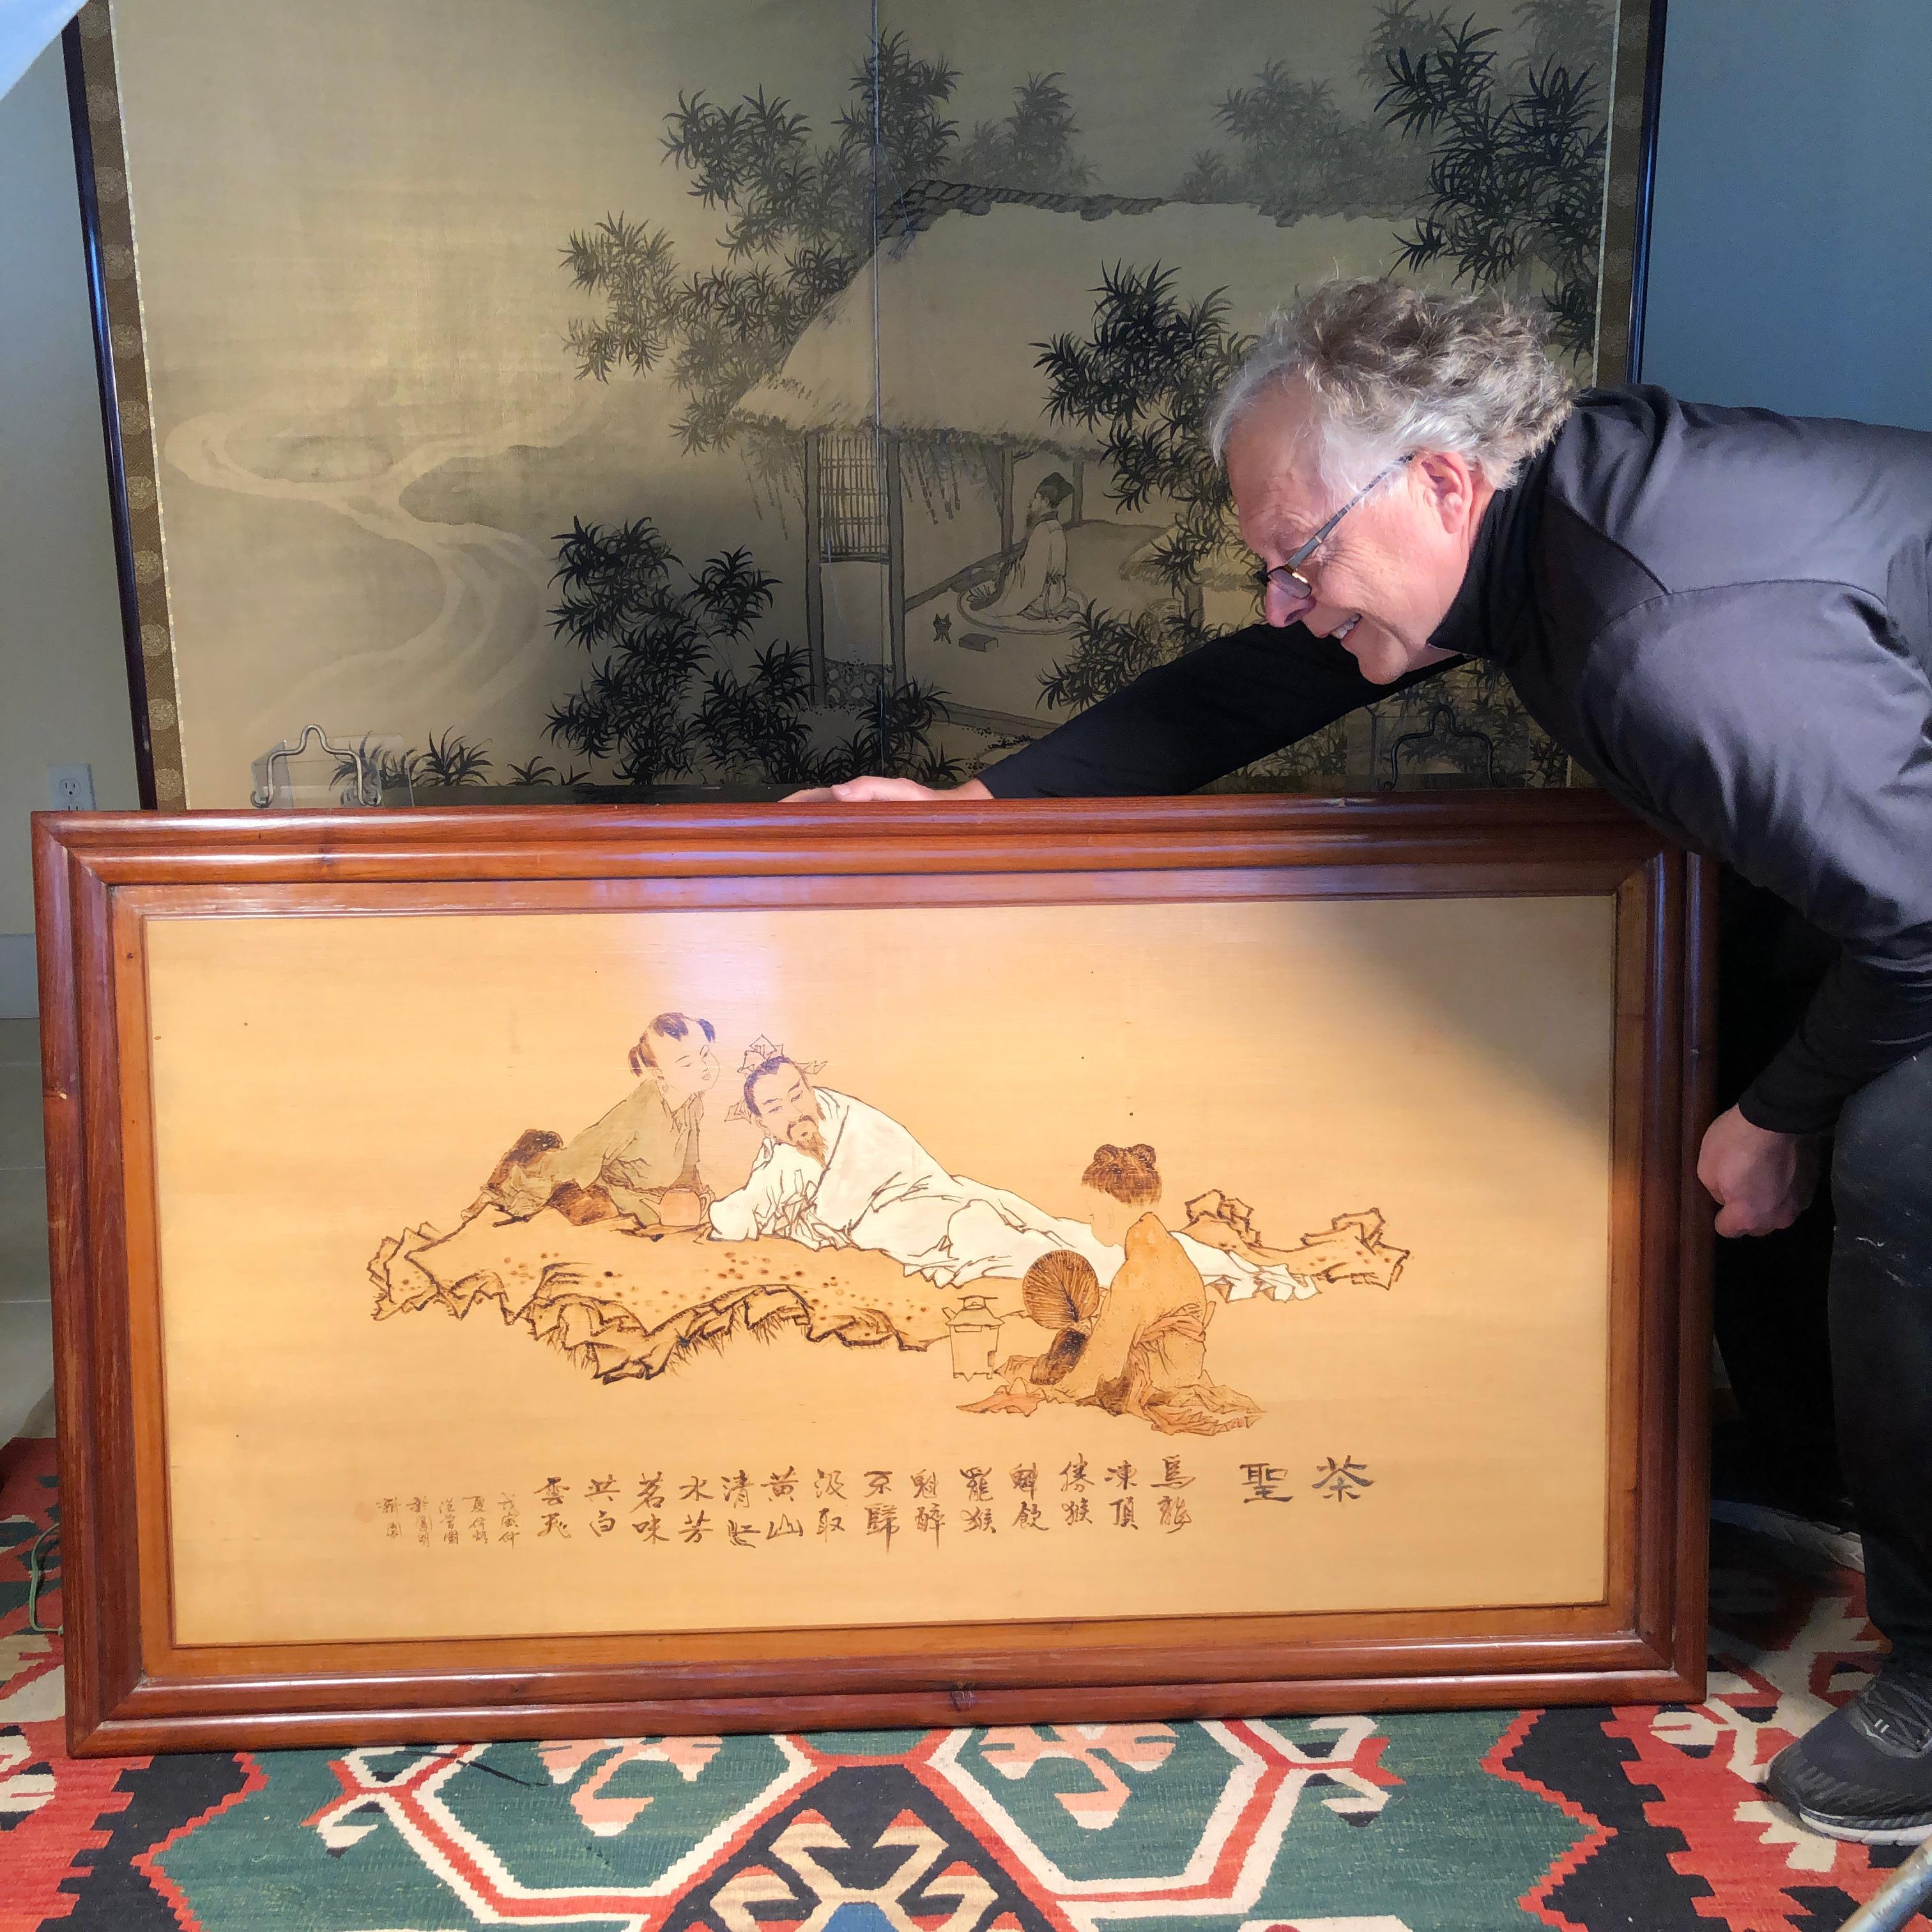 China, a panoramic pyrography painting on panel: “Master Tea Ceremony” by then Living Treasure Fang Tzun or his workshop (1930-2000)

Inscribed “This year mid summer he painted in new
section of Yuan Ming Gardens”. 
Panel depicts “LUK YU” a famous